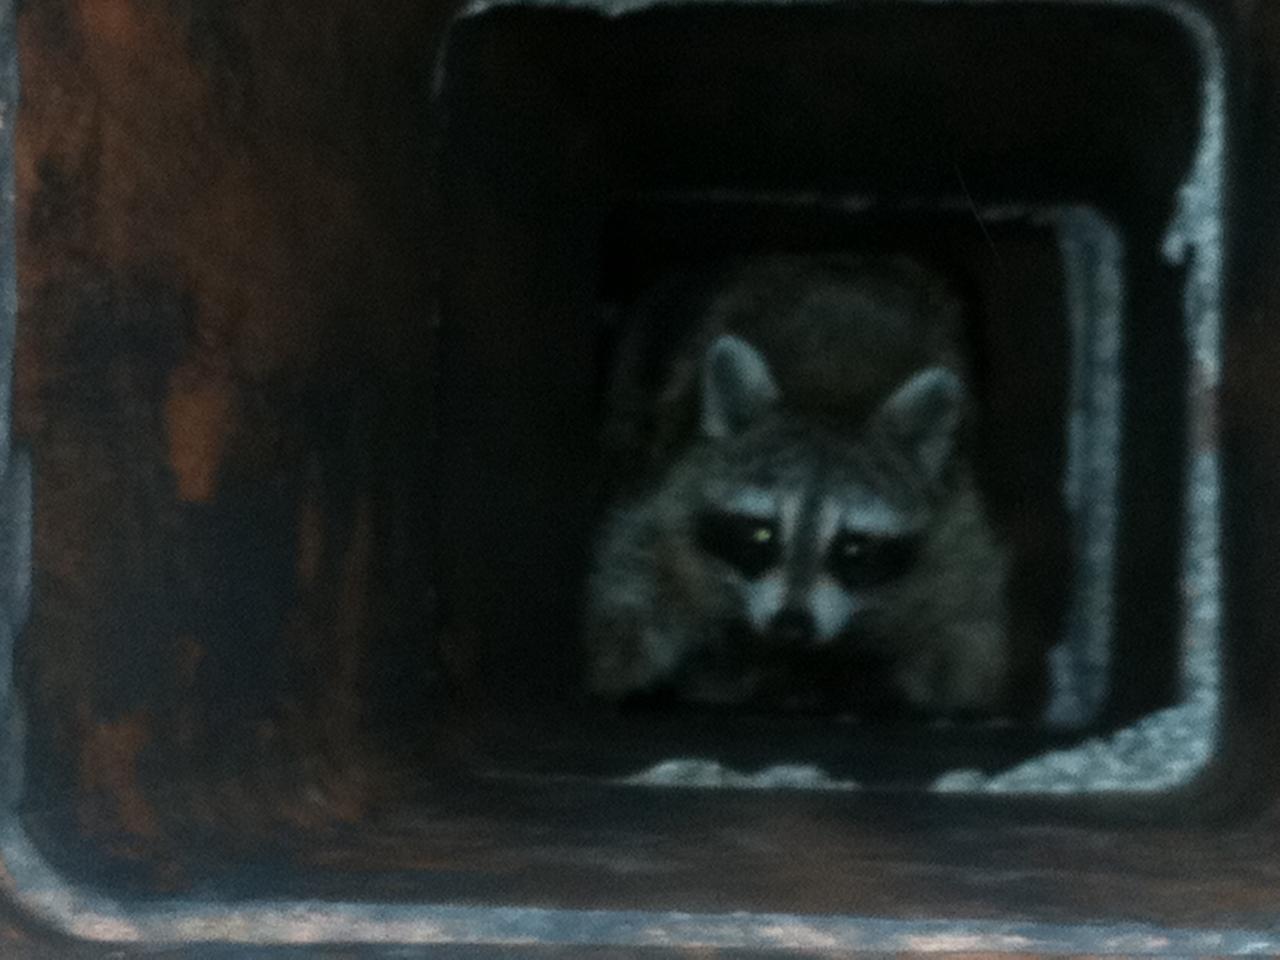 Raccoon looks up from inside a chimney.